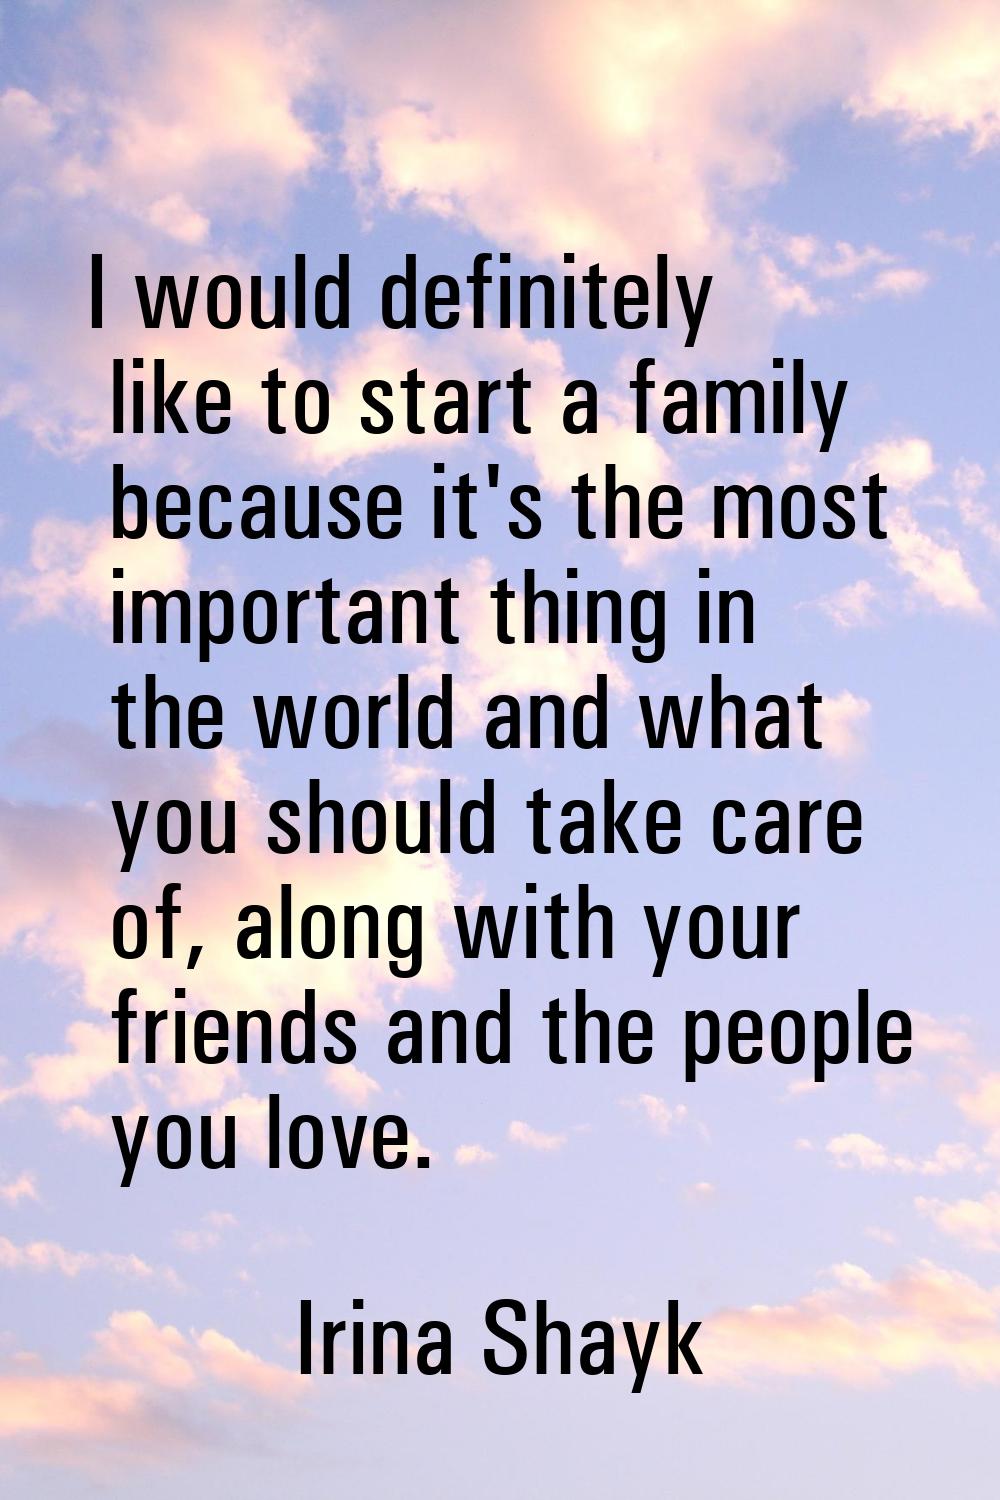 I would definitely like to start a family because it's the most important thing in the world and wh